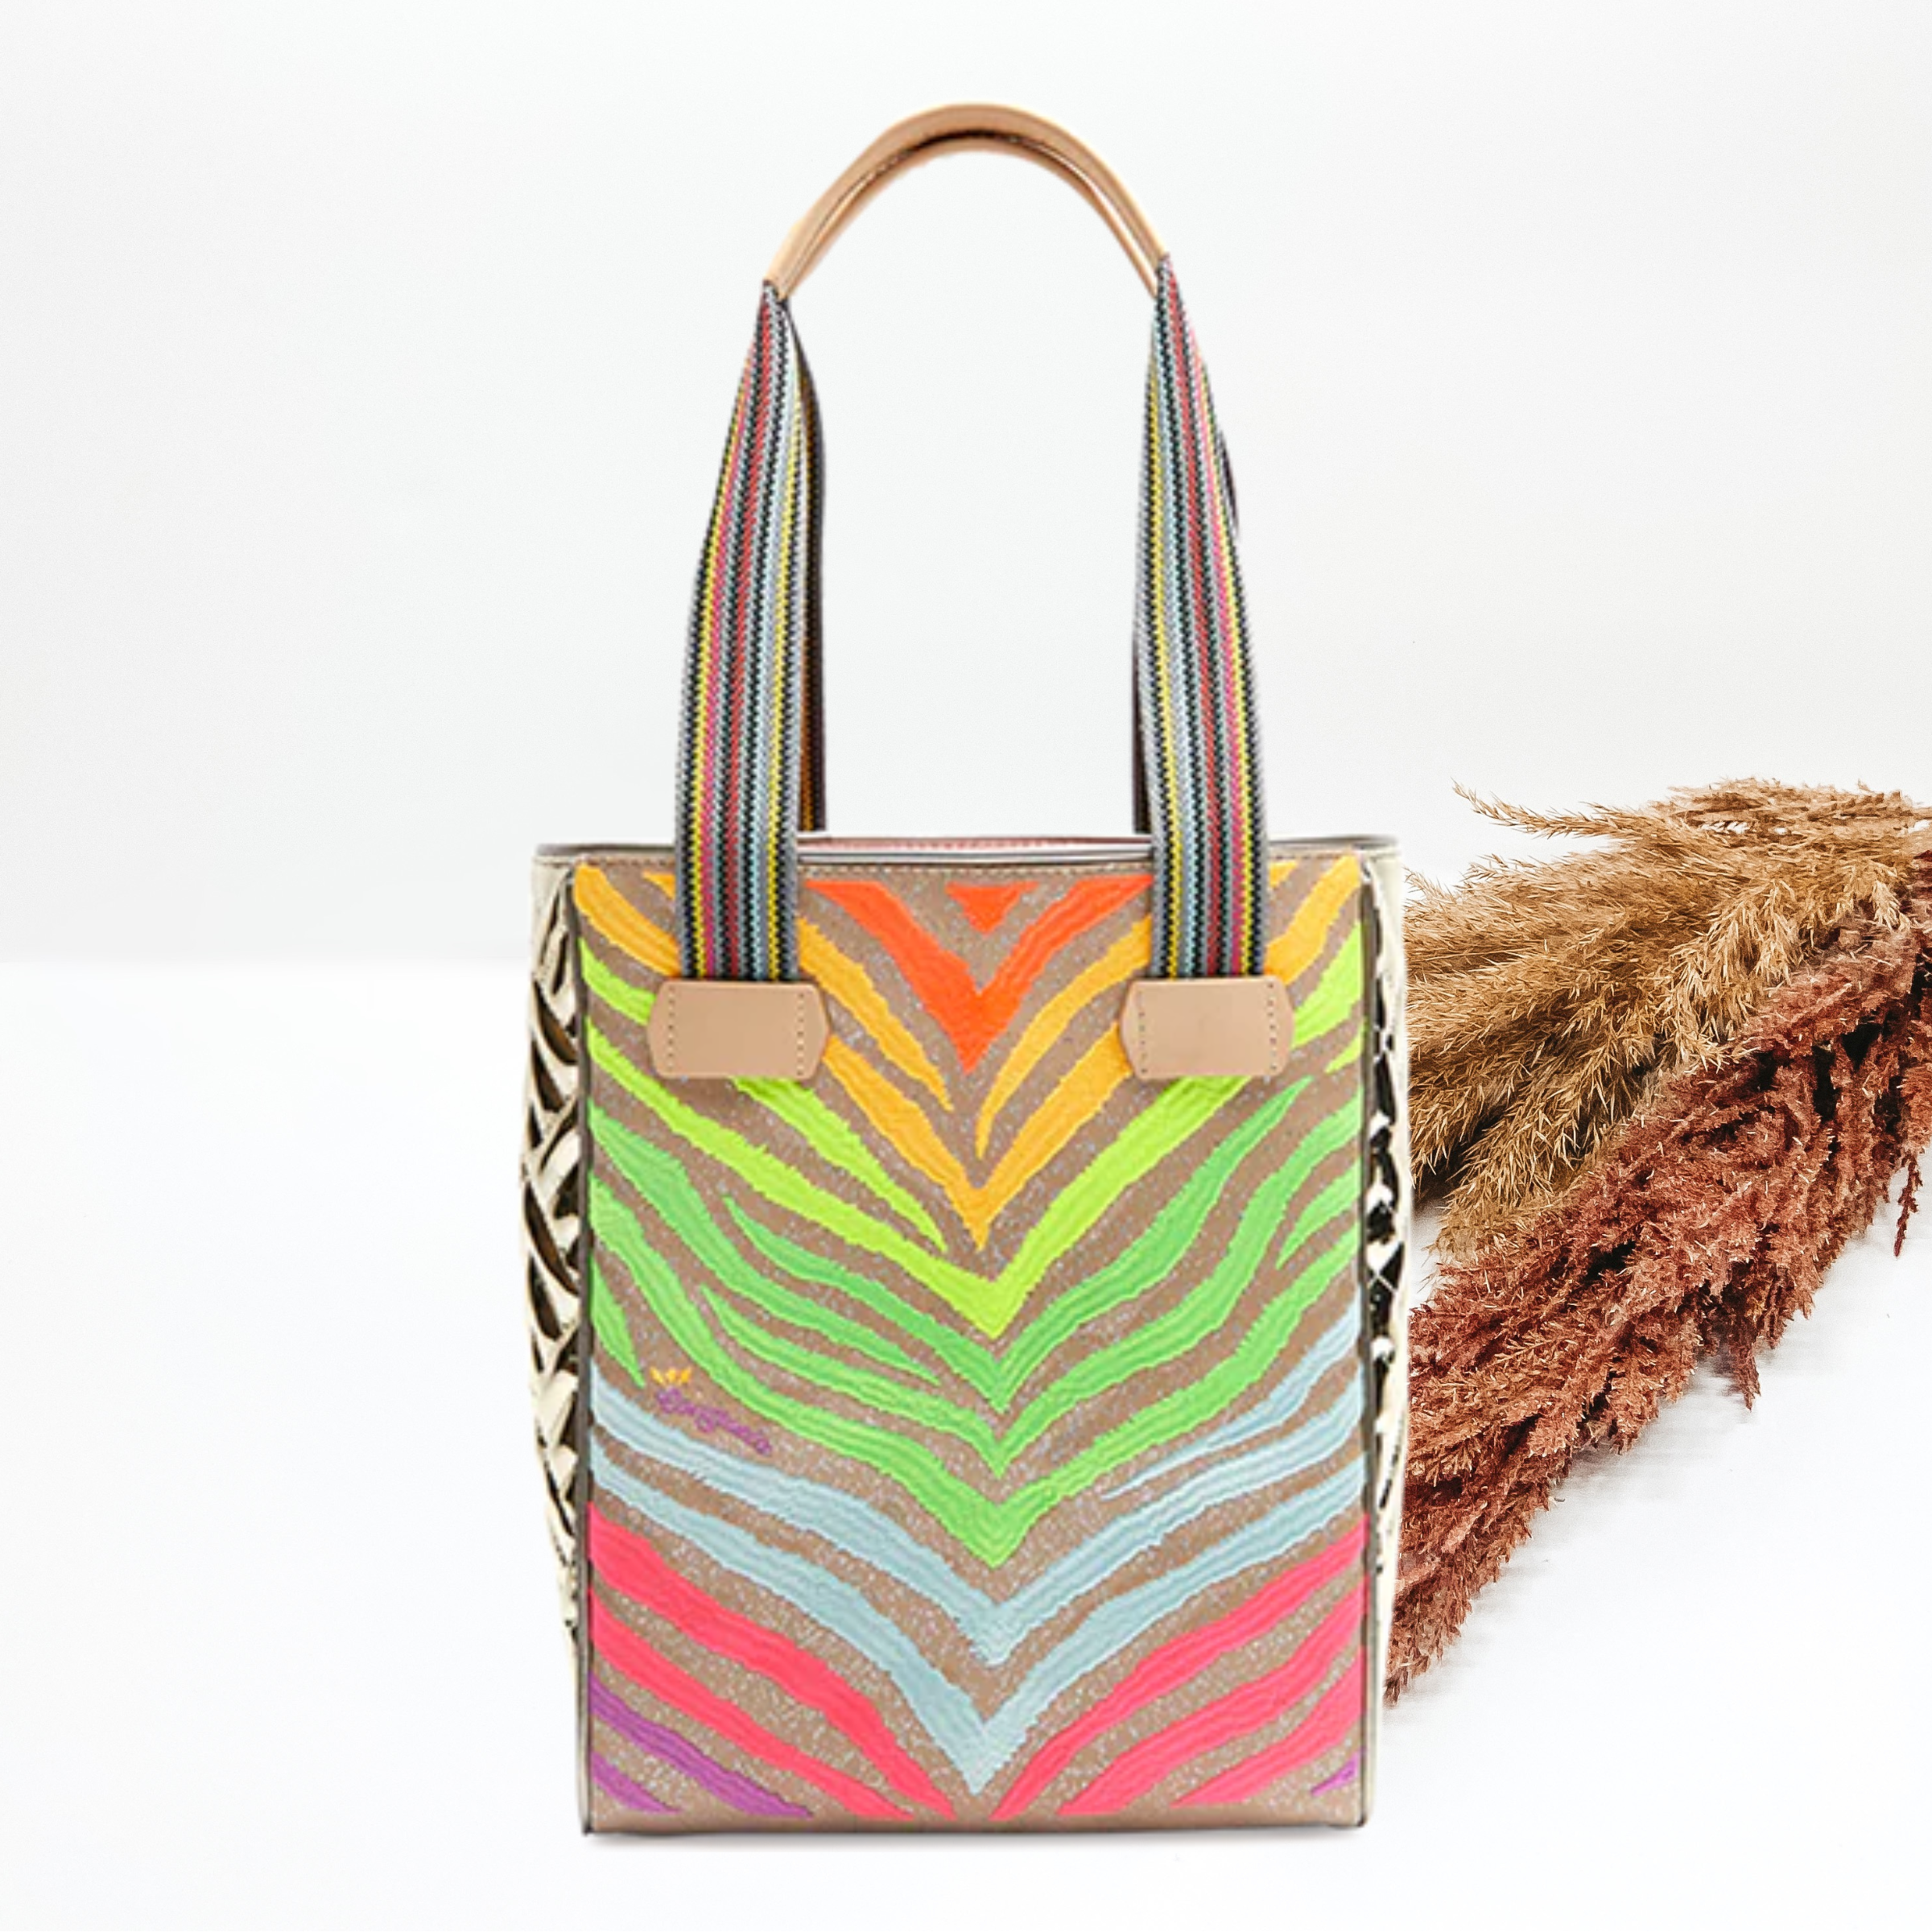 Gold tote bag with a multicolored embroidered zebra print design. The straps are striped with light tan accents. This tote is pictured on a white background with tan and brown pompous grass on the right side.